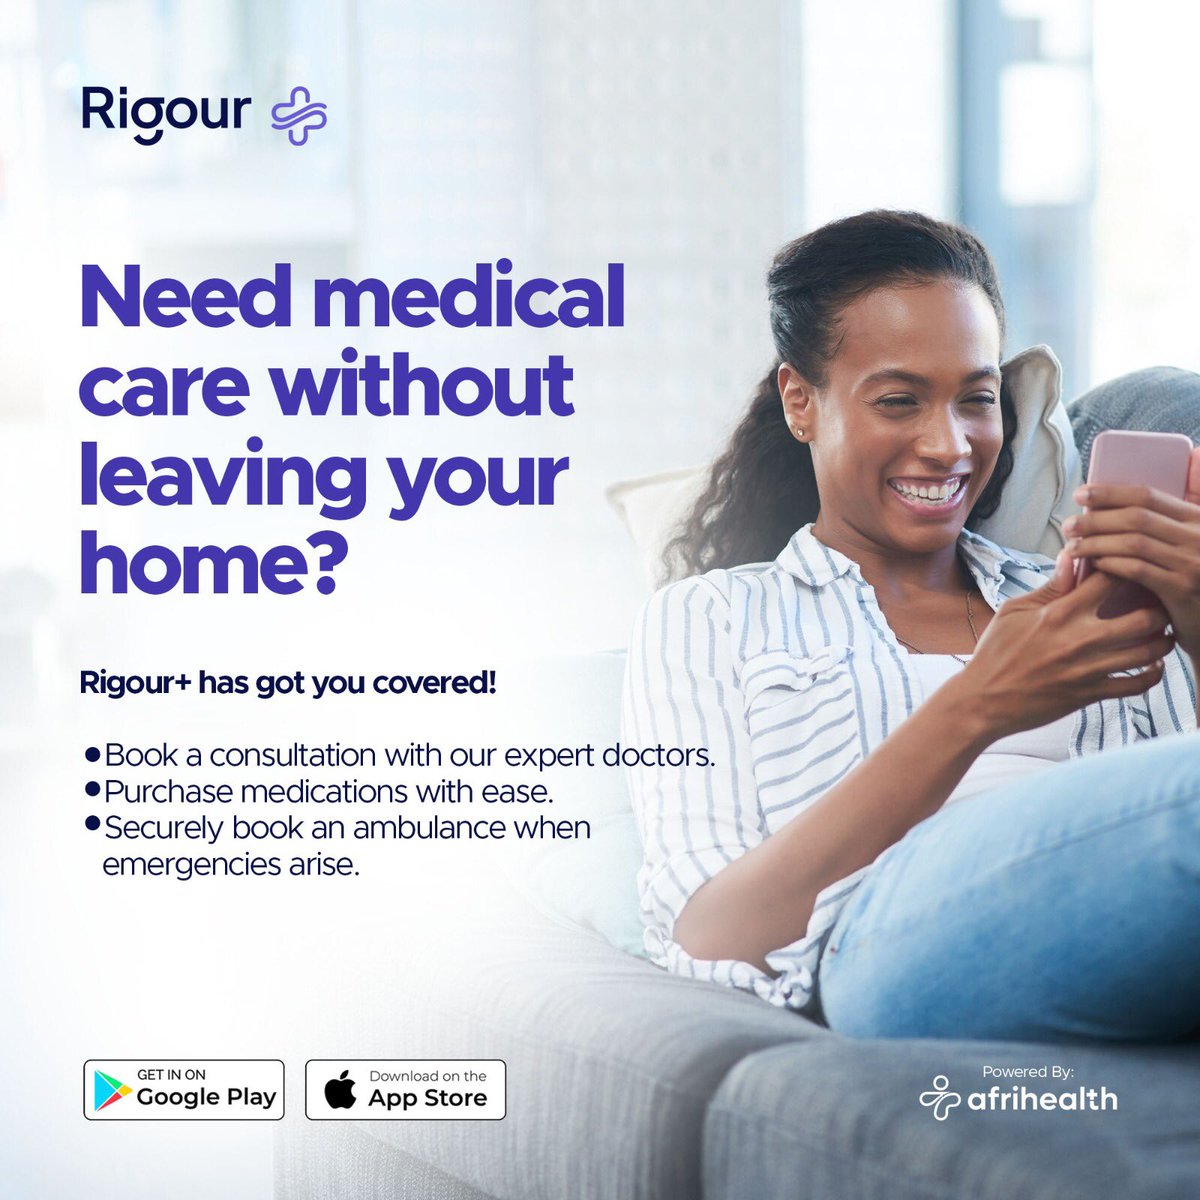 Get quality medical care from the comfort of your home.

Rigour+ has got you covered! 

Your health, your way! 🏥📲

#Telemedicine #HealthcareAtHome #VirtualConsultation #StayHealthy #MedicalCare #RigourPlus